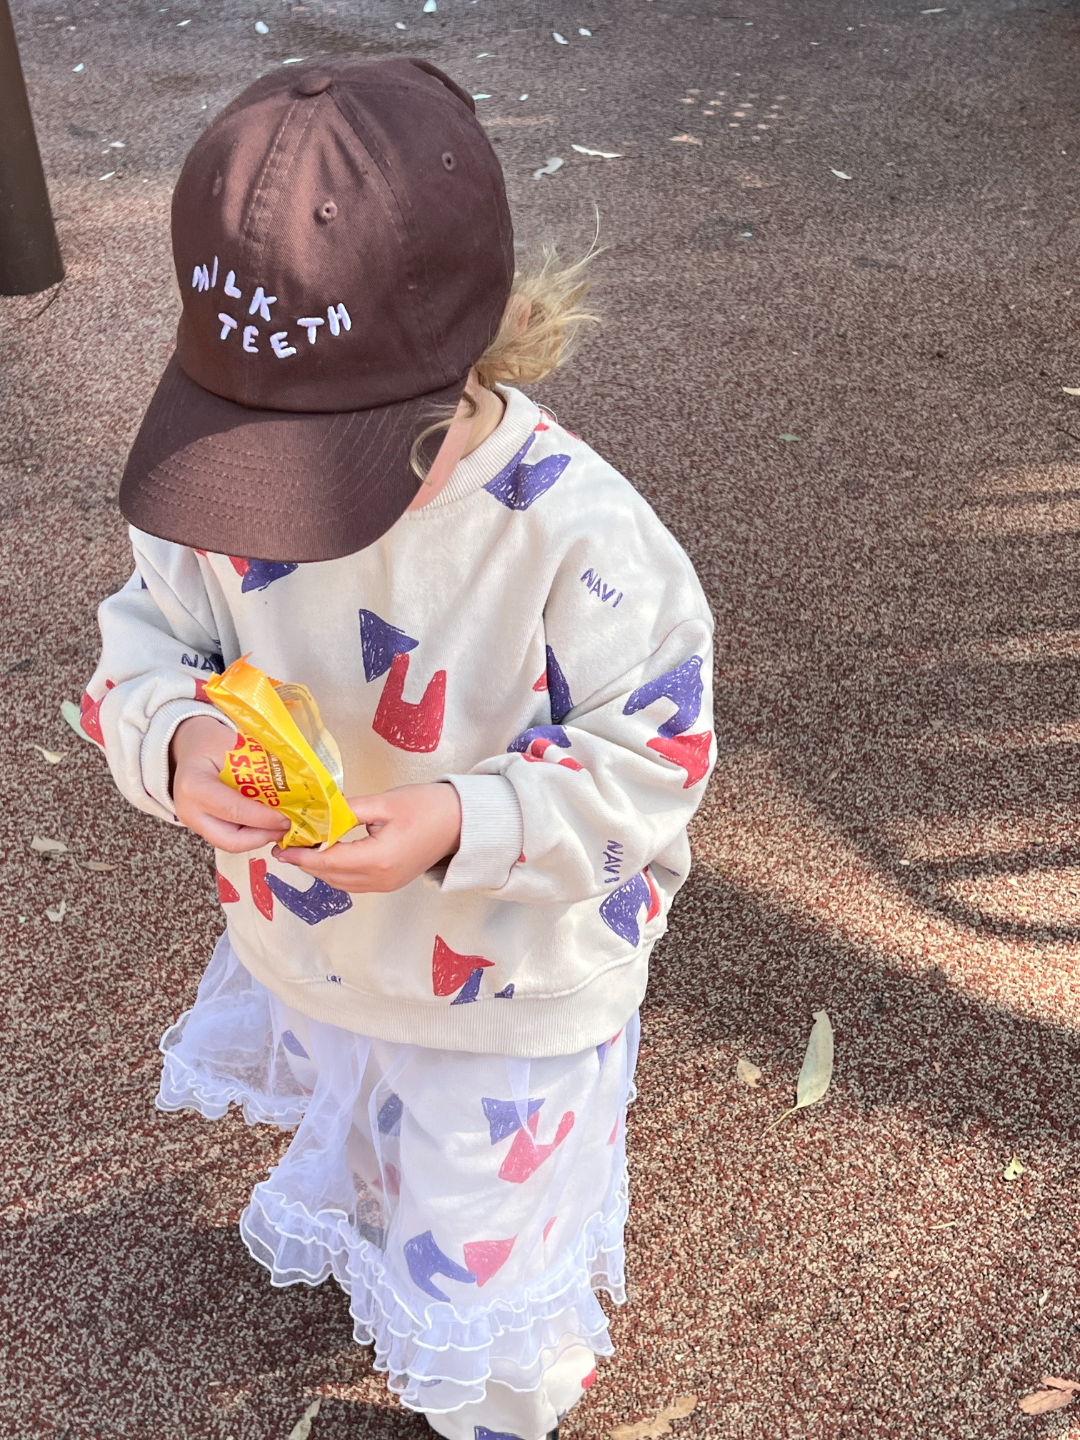 Child wearing the Milk Teeth baseball cap in brown pink with pale purple Milk Teeth lettering, outdoors at a park with a brown floor. They are wearing a cream sweatshirt printed with purple and red shapes, a white tutu skirt, and eating a snack bar in a yellow wrapper.